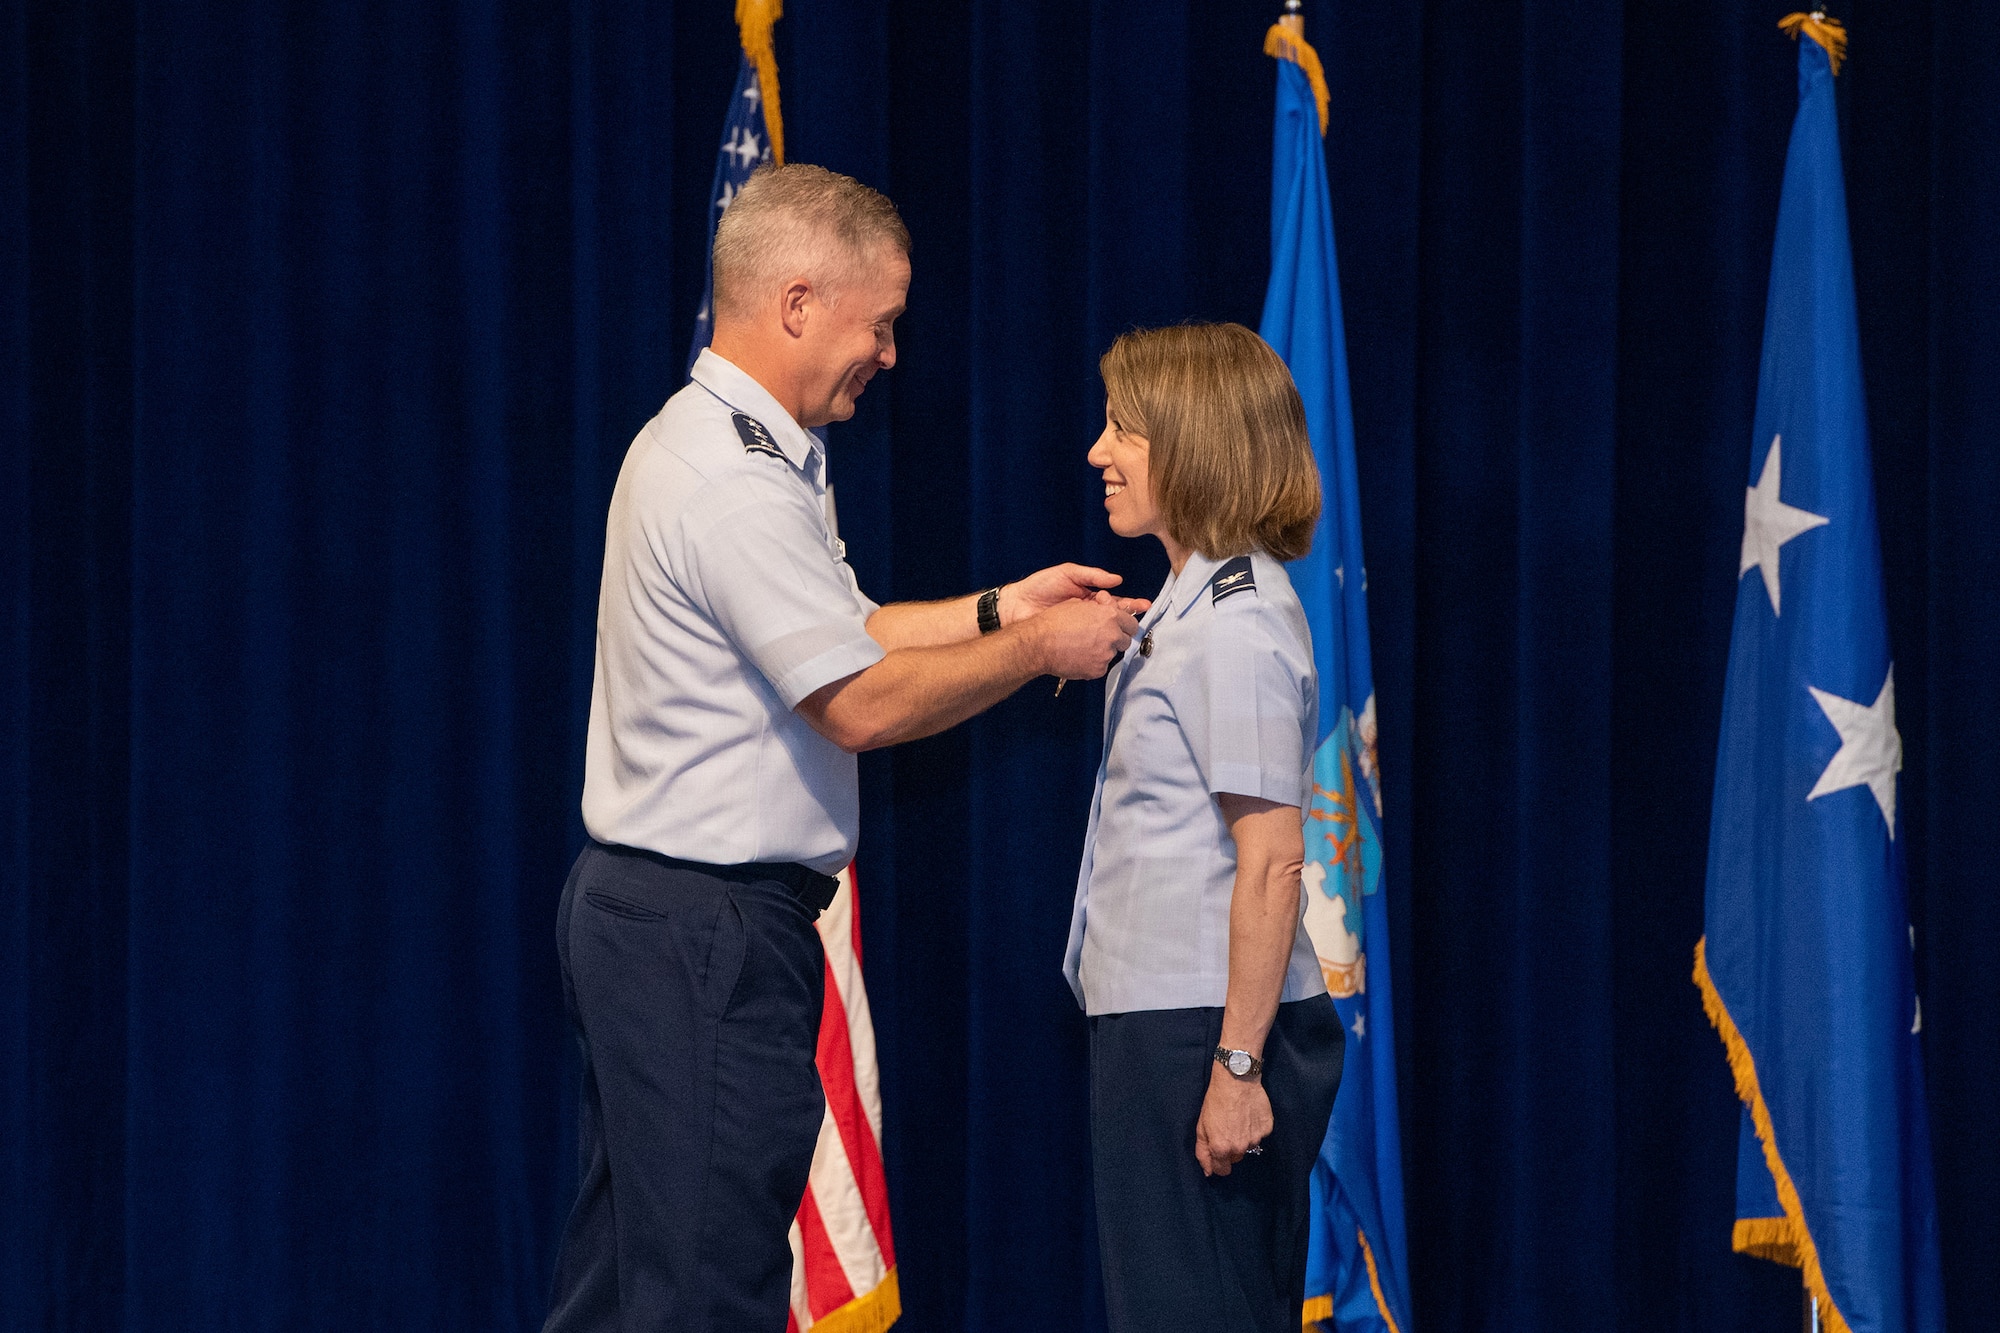 Lt. Gen. Timothy Haugh, commander of 16th Air Force, presents the Legion of Merit medal to Col. Katharine Branson during the Air Force Technical Applications Center's change of command ceremony June 2, 2022 at Patrick Space Force Base, Fla.  (U.S. Air Force photo by Amanda Inman)